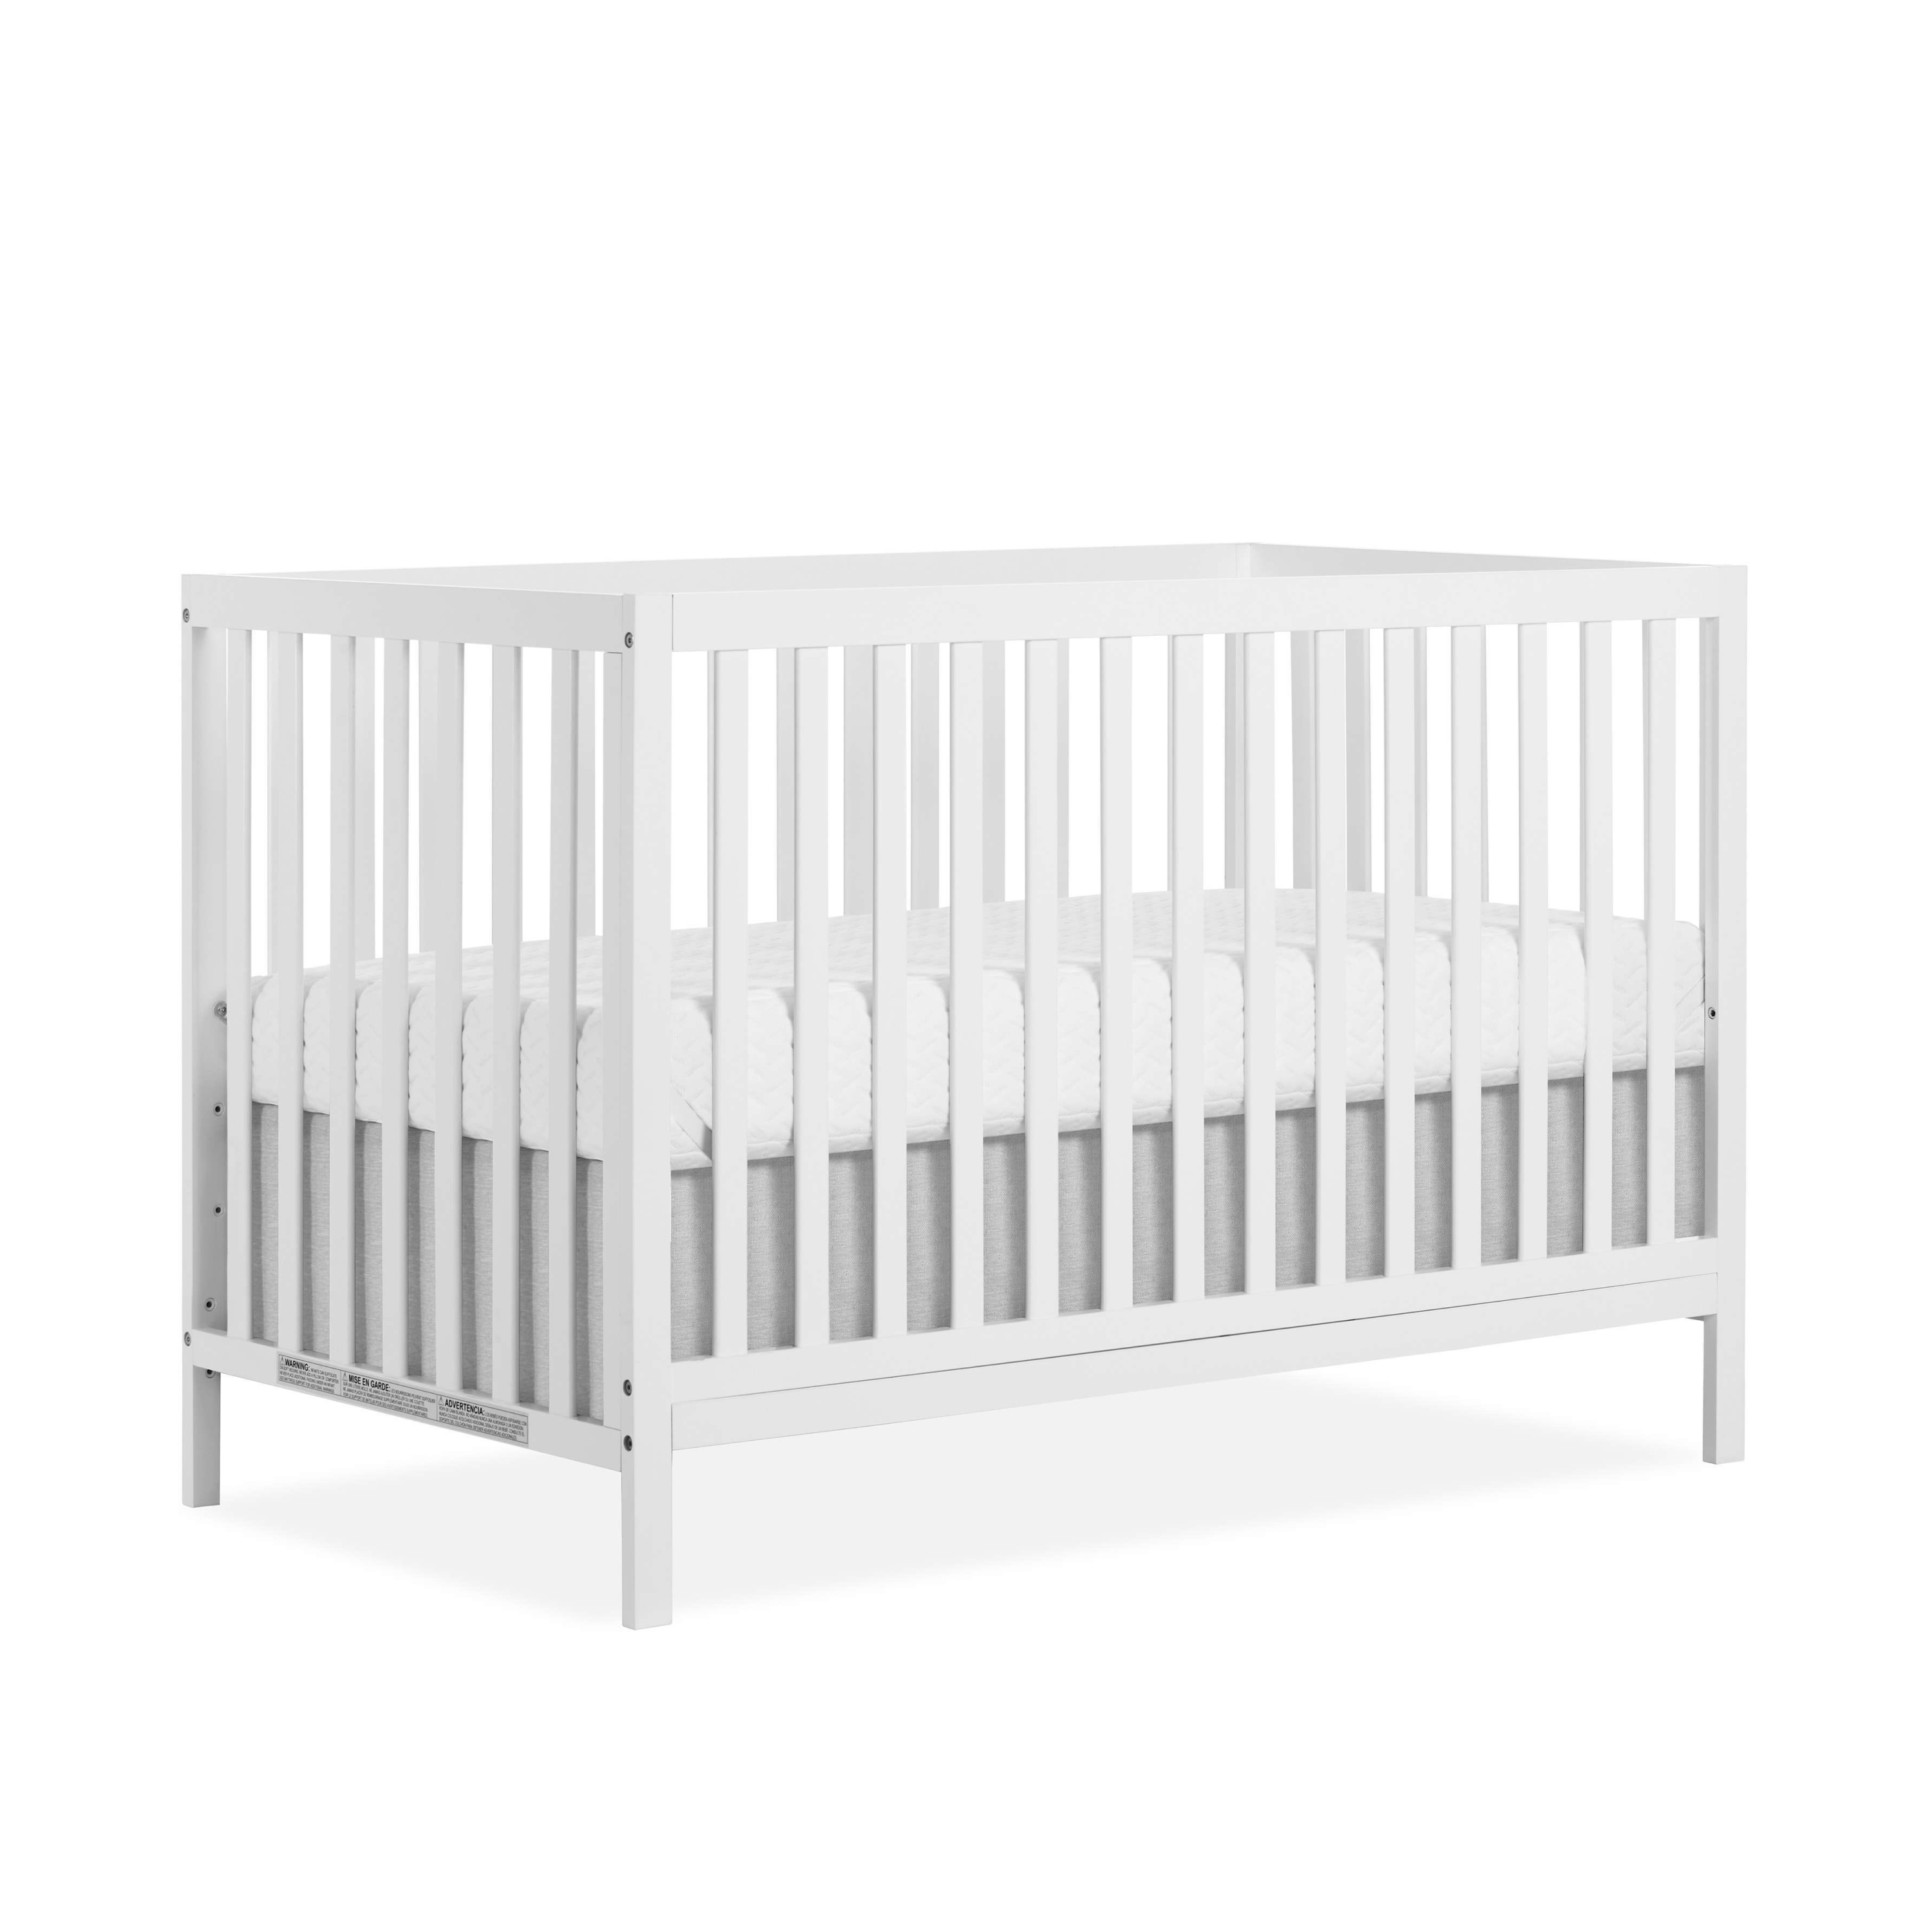 Dream On Me Synergy MOD Convertible Crib in White, Greenguard Gold Certified - image 1 of 6